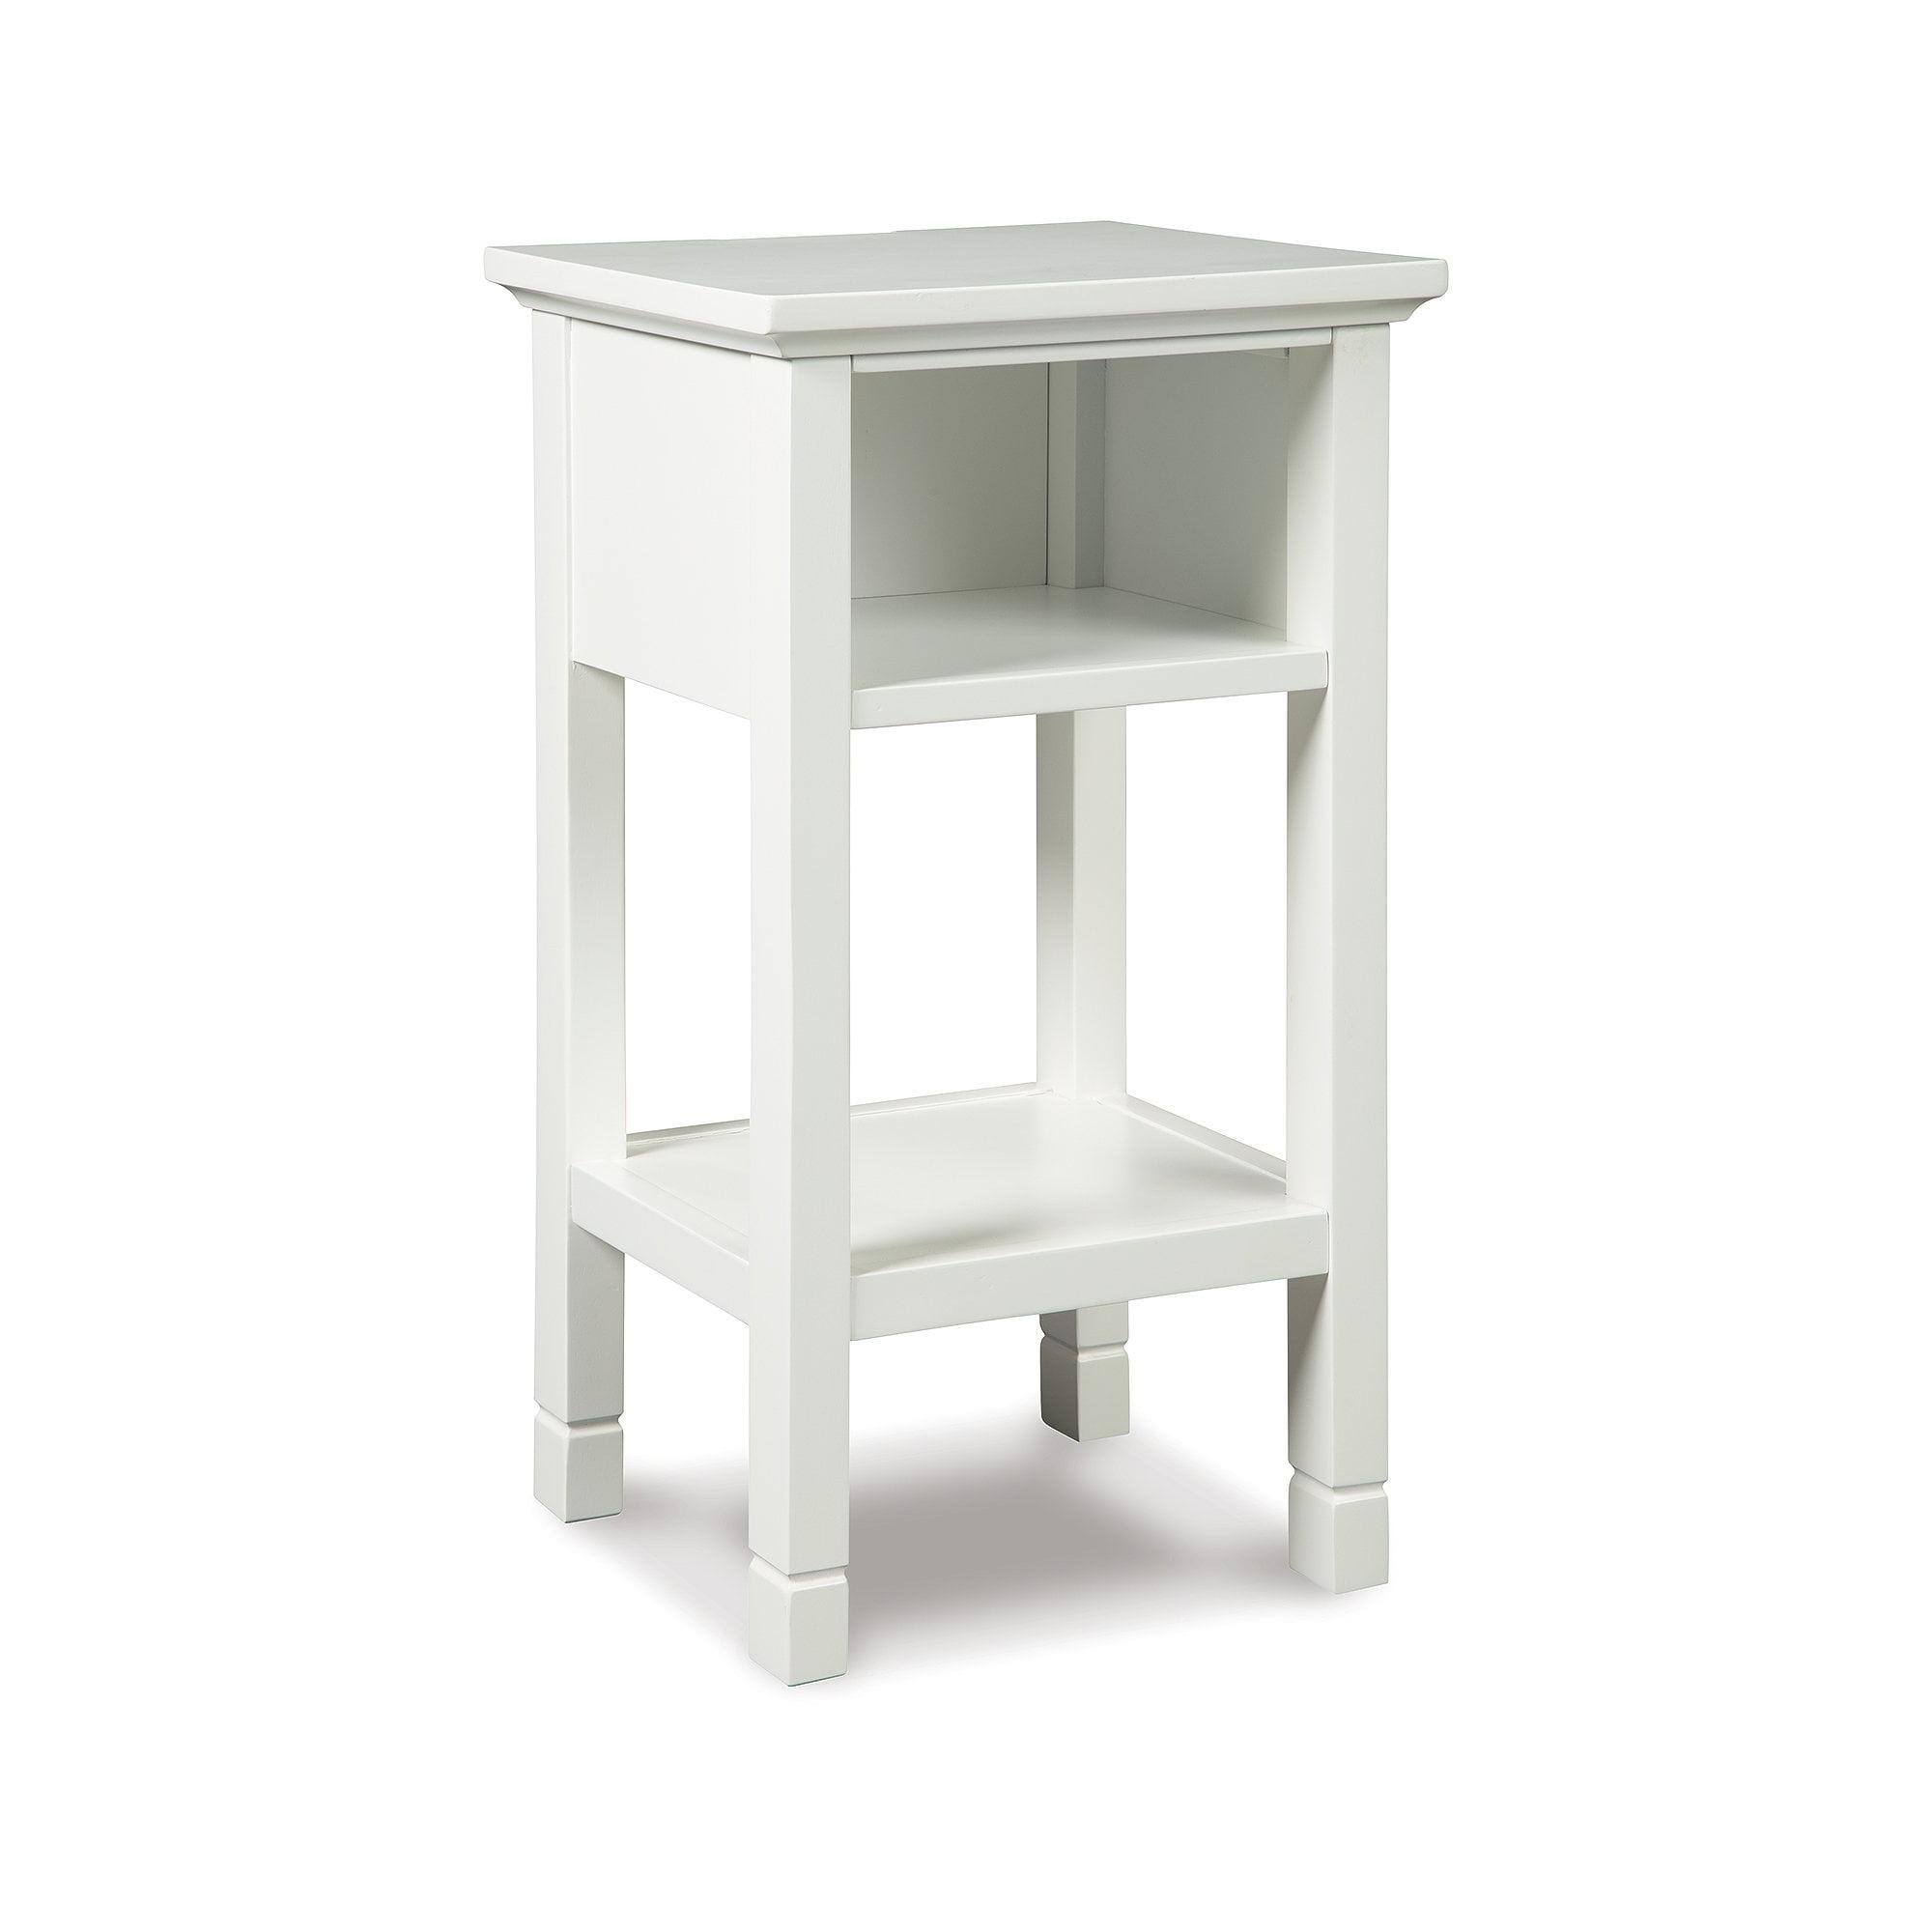 Sleek White Square Accent Table with USB Charging Ports